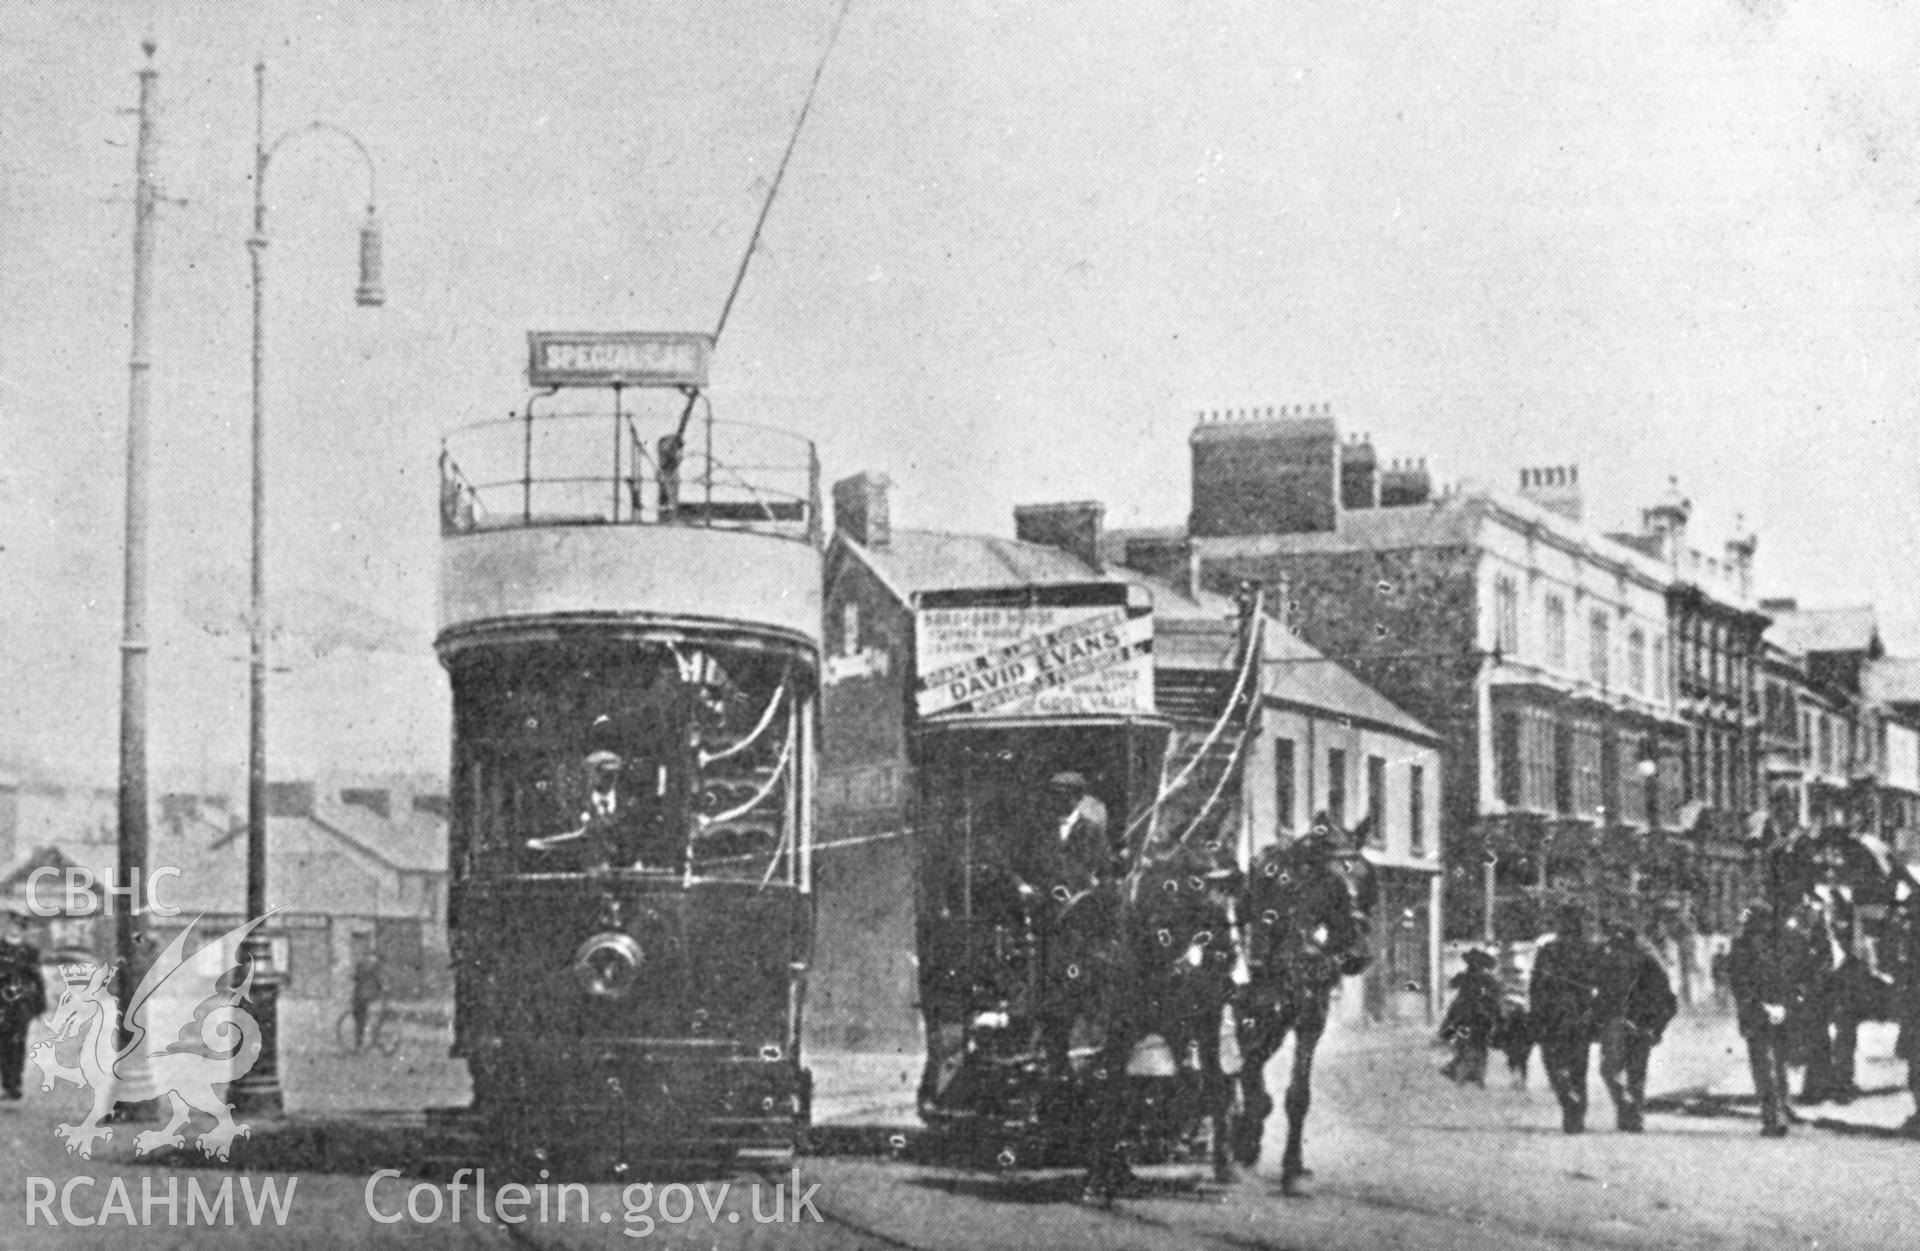 Black and white acetate negative showing electric tram and horse-drawn tram in Llanelli.